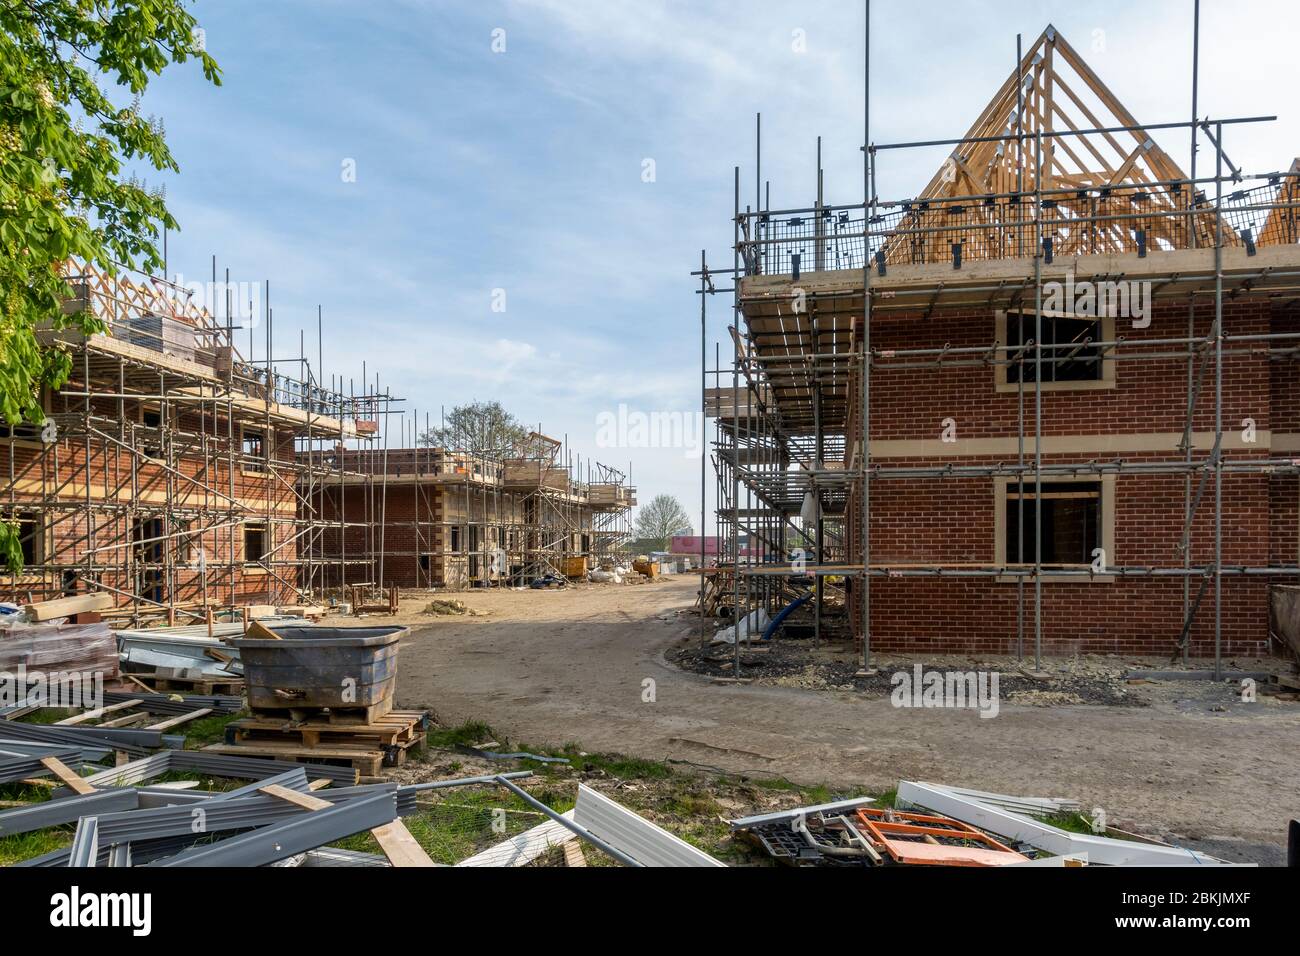 Brand new homes being built in Trowbridge, Wiltshire. Construction site closed during lockdown because of Coronavirus - Covid 19, England UK Stock Photo